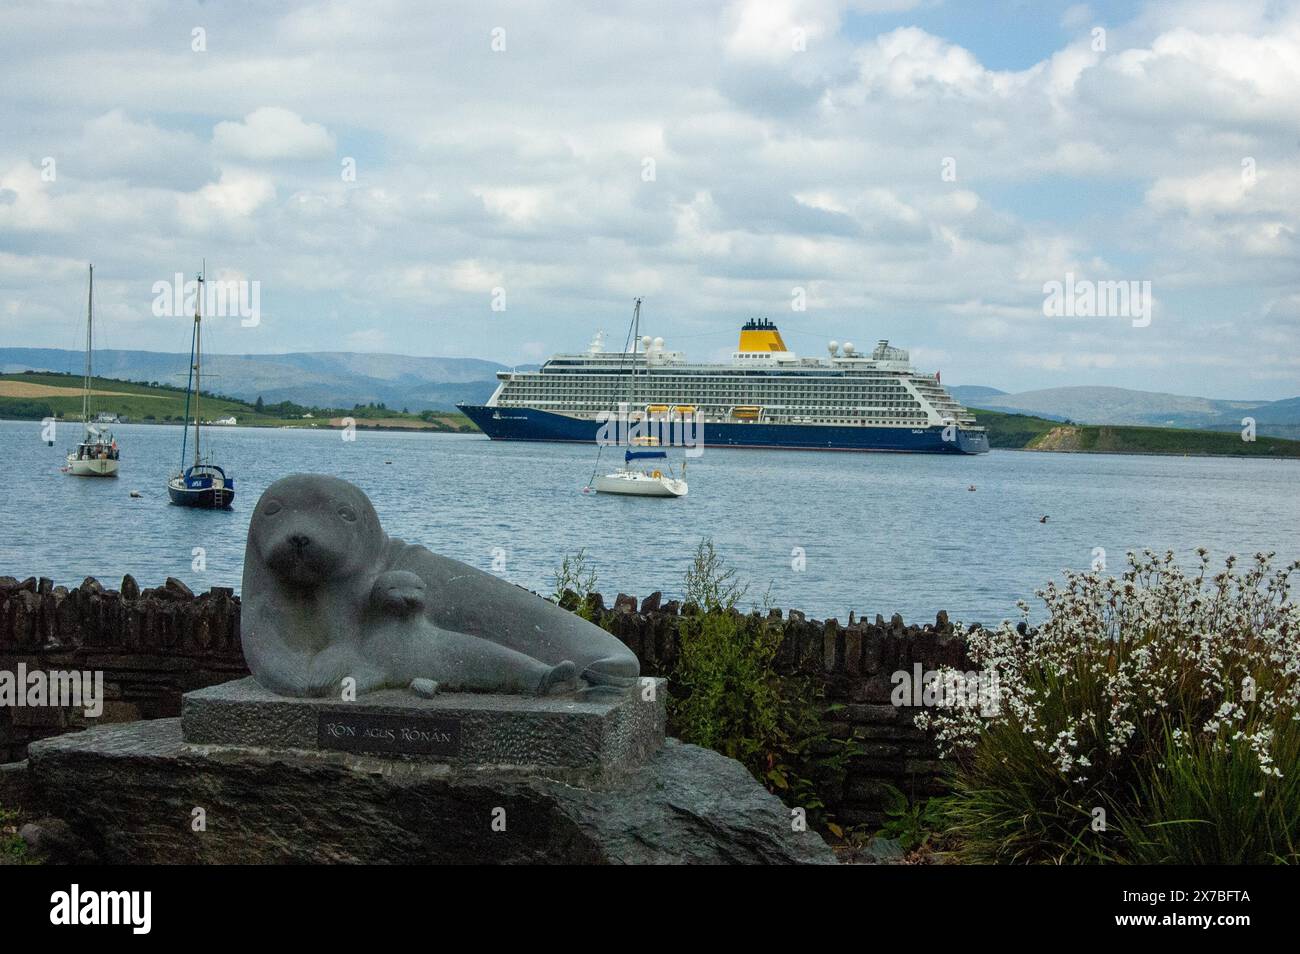 Sunday May 19, 2024, Bantry West Cork Ireland; The second of this week, Spirit Of Adventure arrived into Bantry port today. The cruise liner, carrying 800 passengers and crew set arrived at 8AM and passengers disembarked for day trips to Killarney, the Beara peninsula and around Bantry town. Credit; ED/Alamy Live News Stock Photo